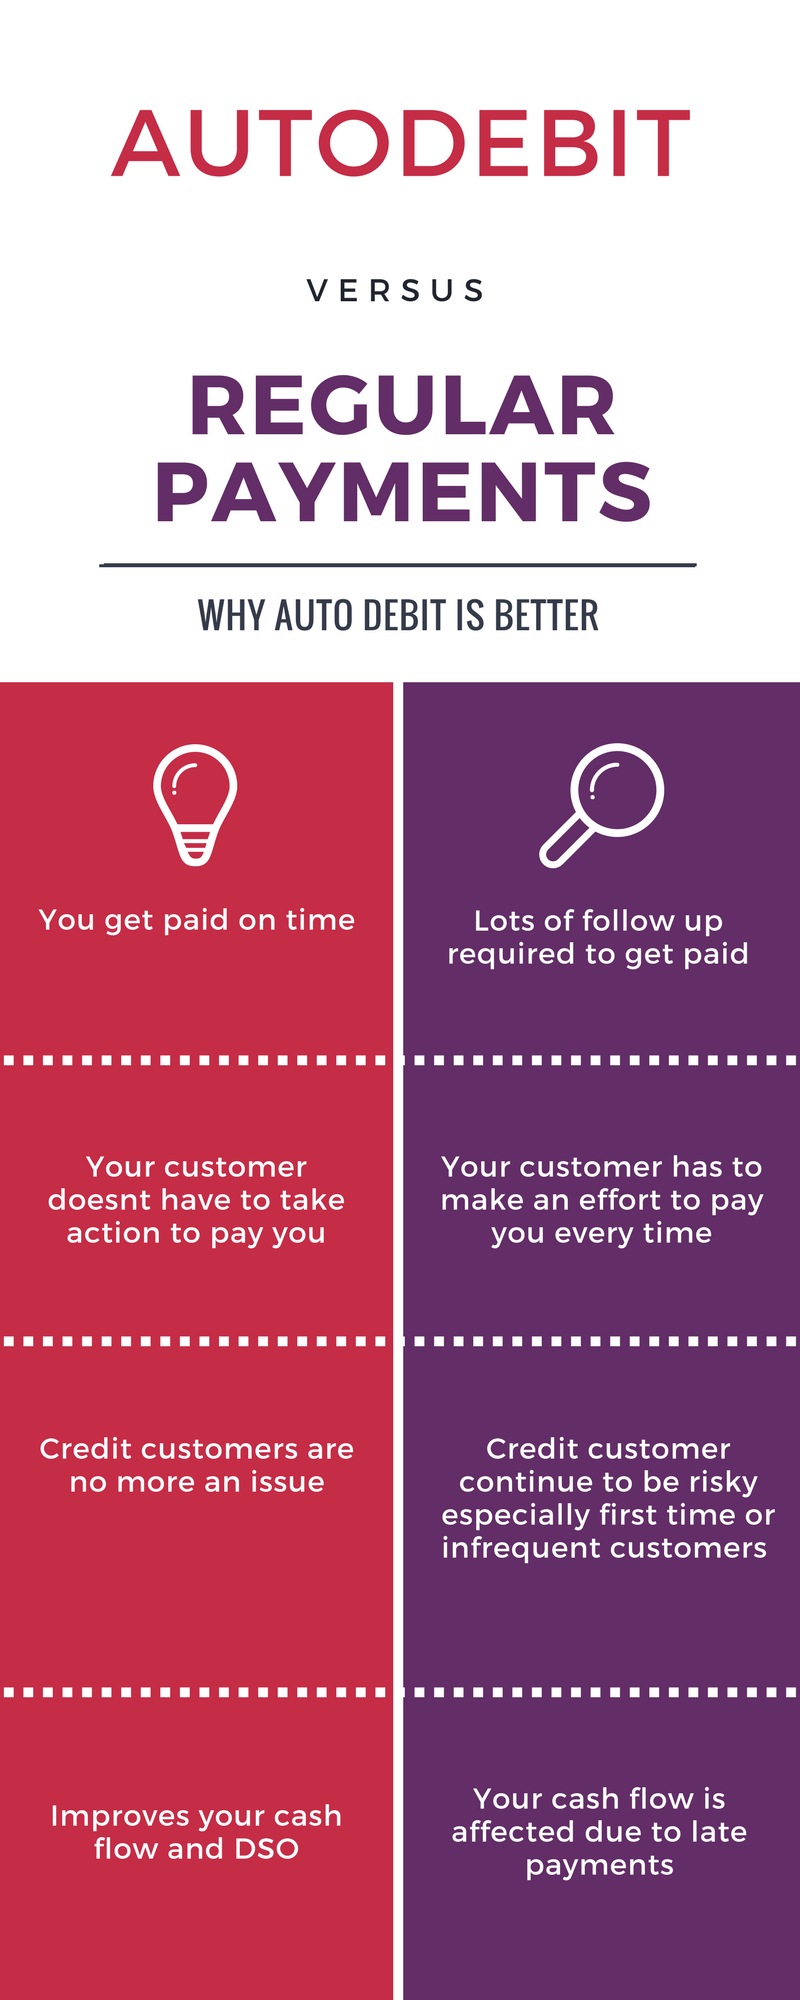 credit customers and Autodevit